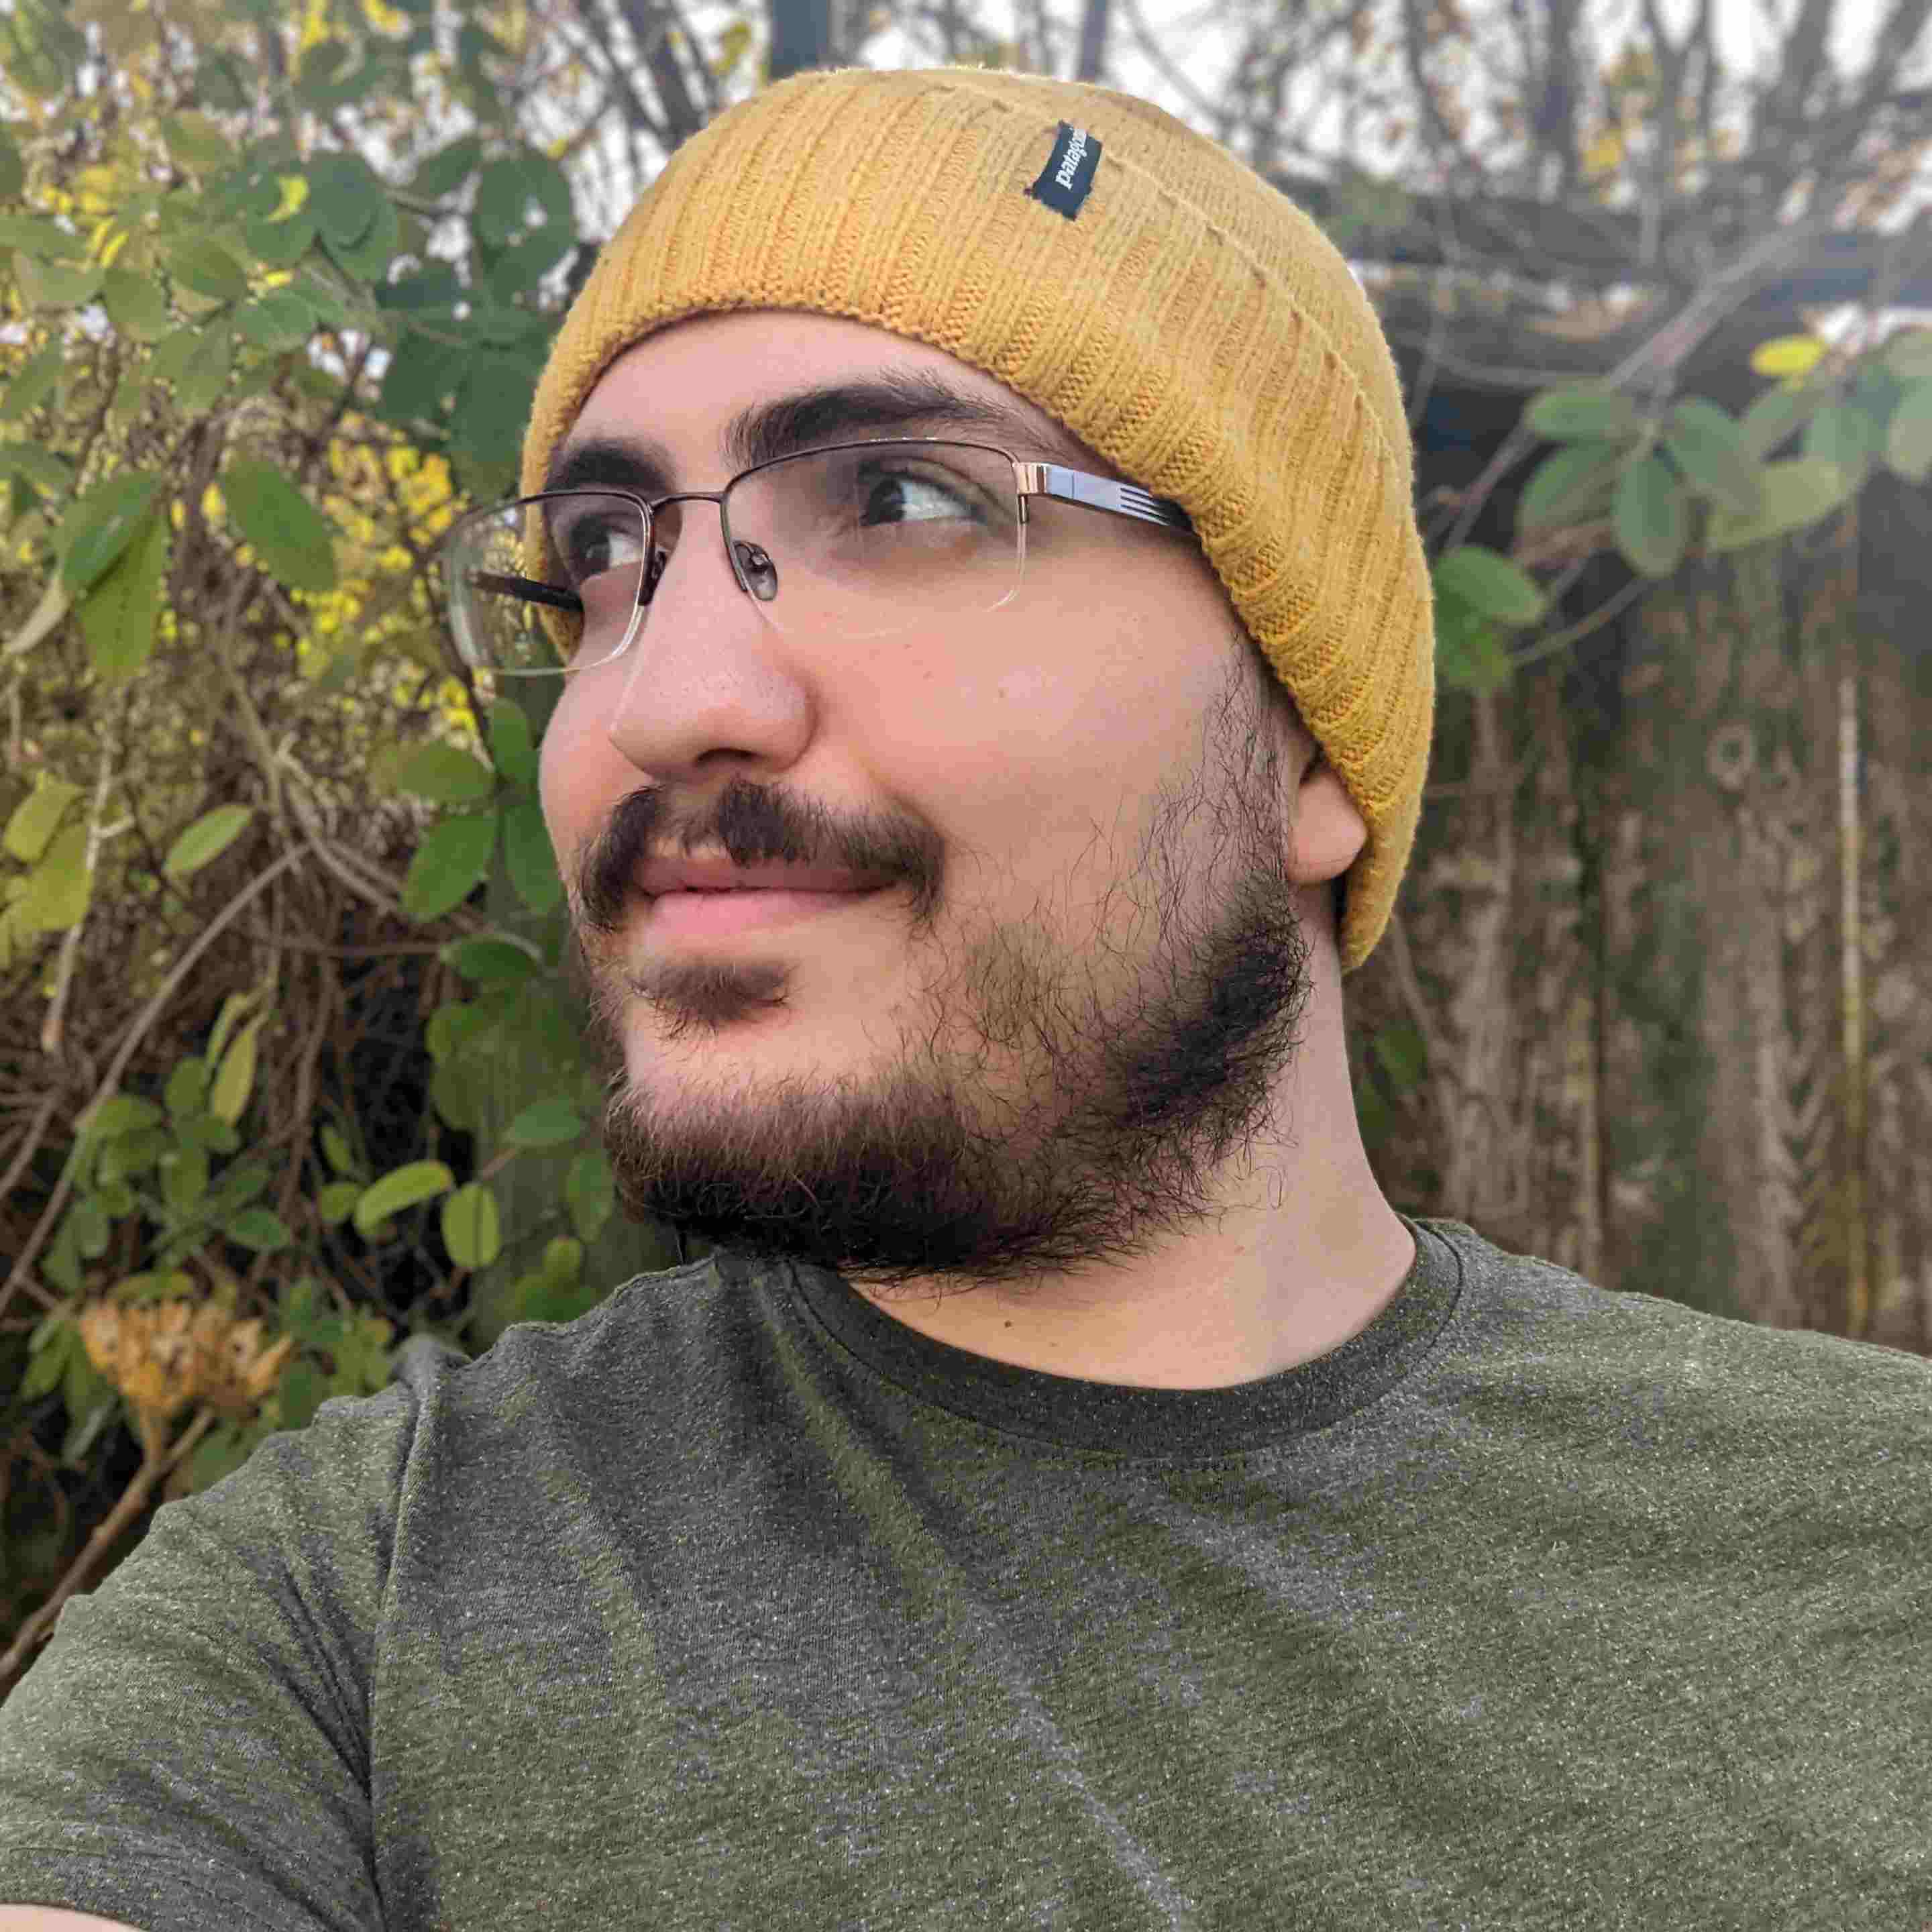 A picture of Kaan, wearing a beanie, in front of some shrubbery.